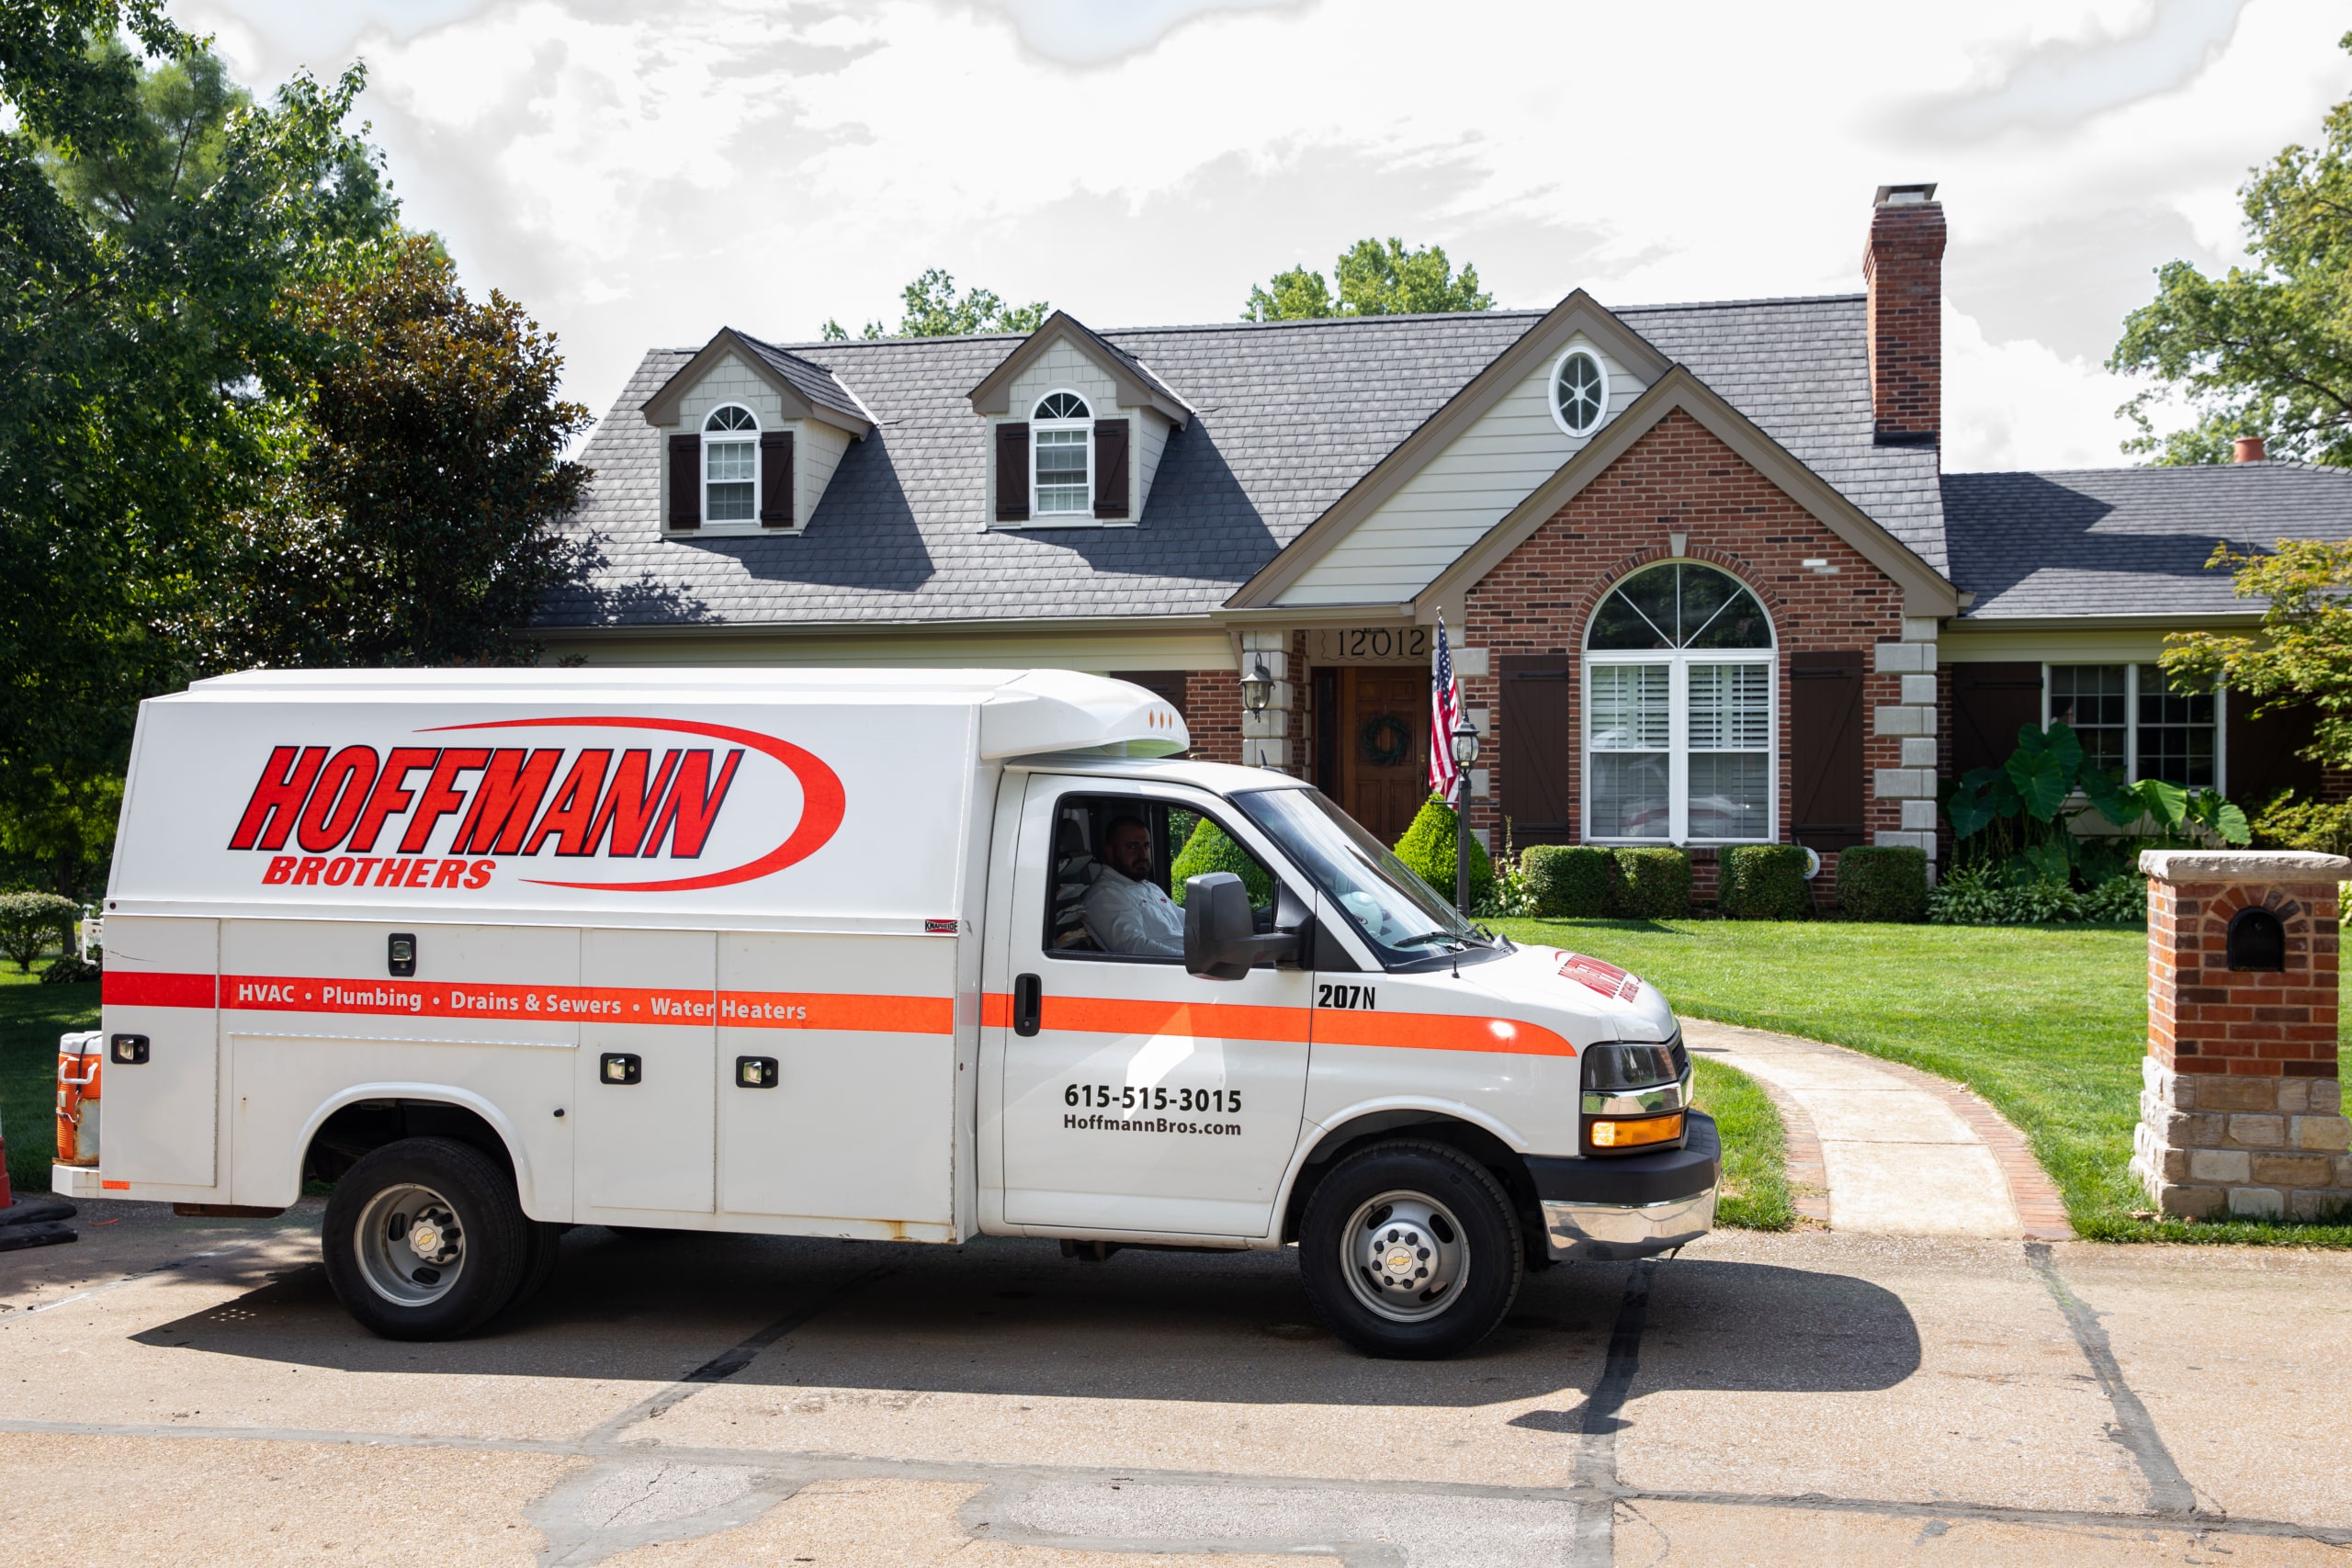 Sewer Pipe Lining Services By Hoffmann Brothers In Nashville, Tn
